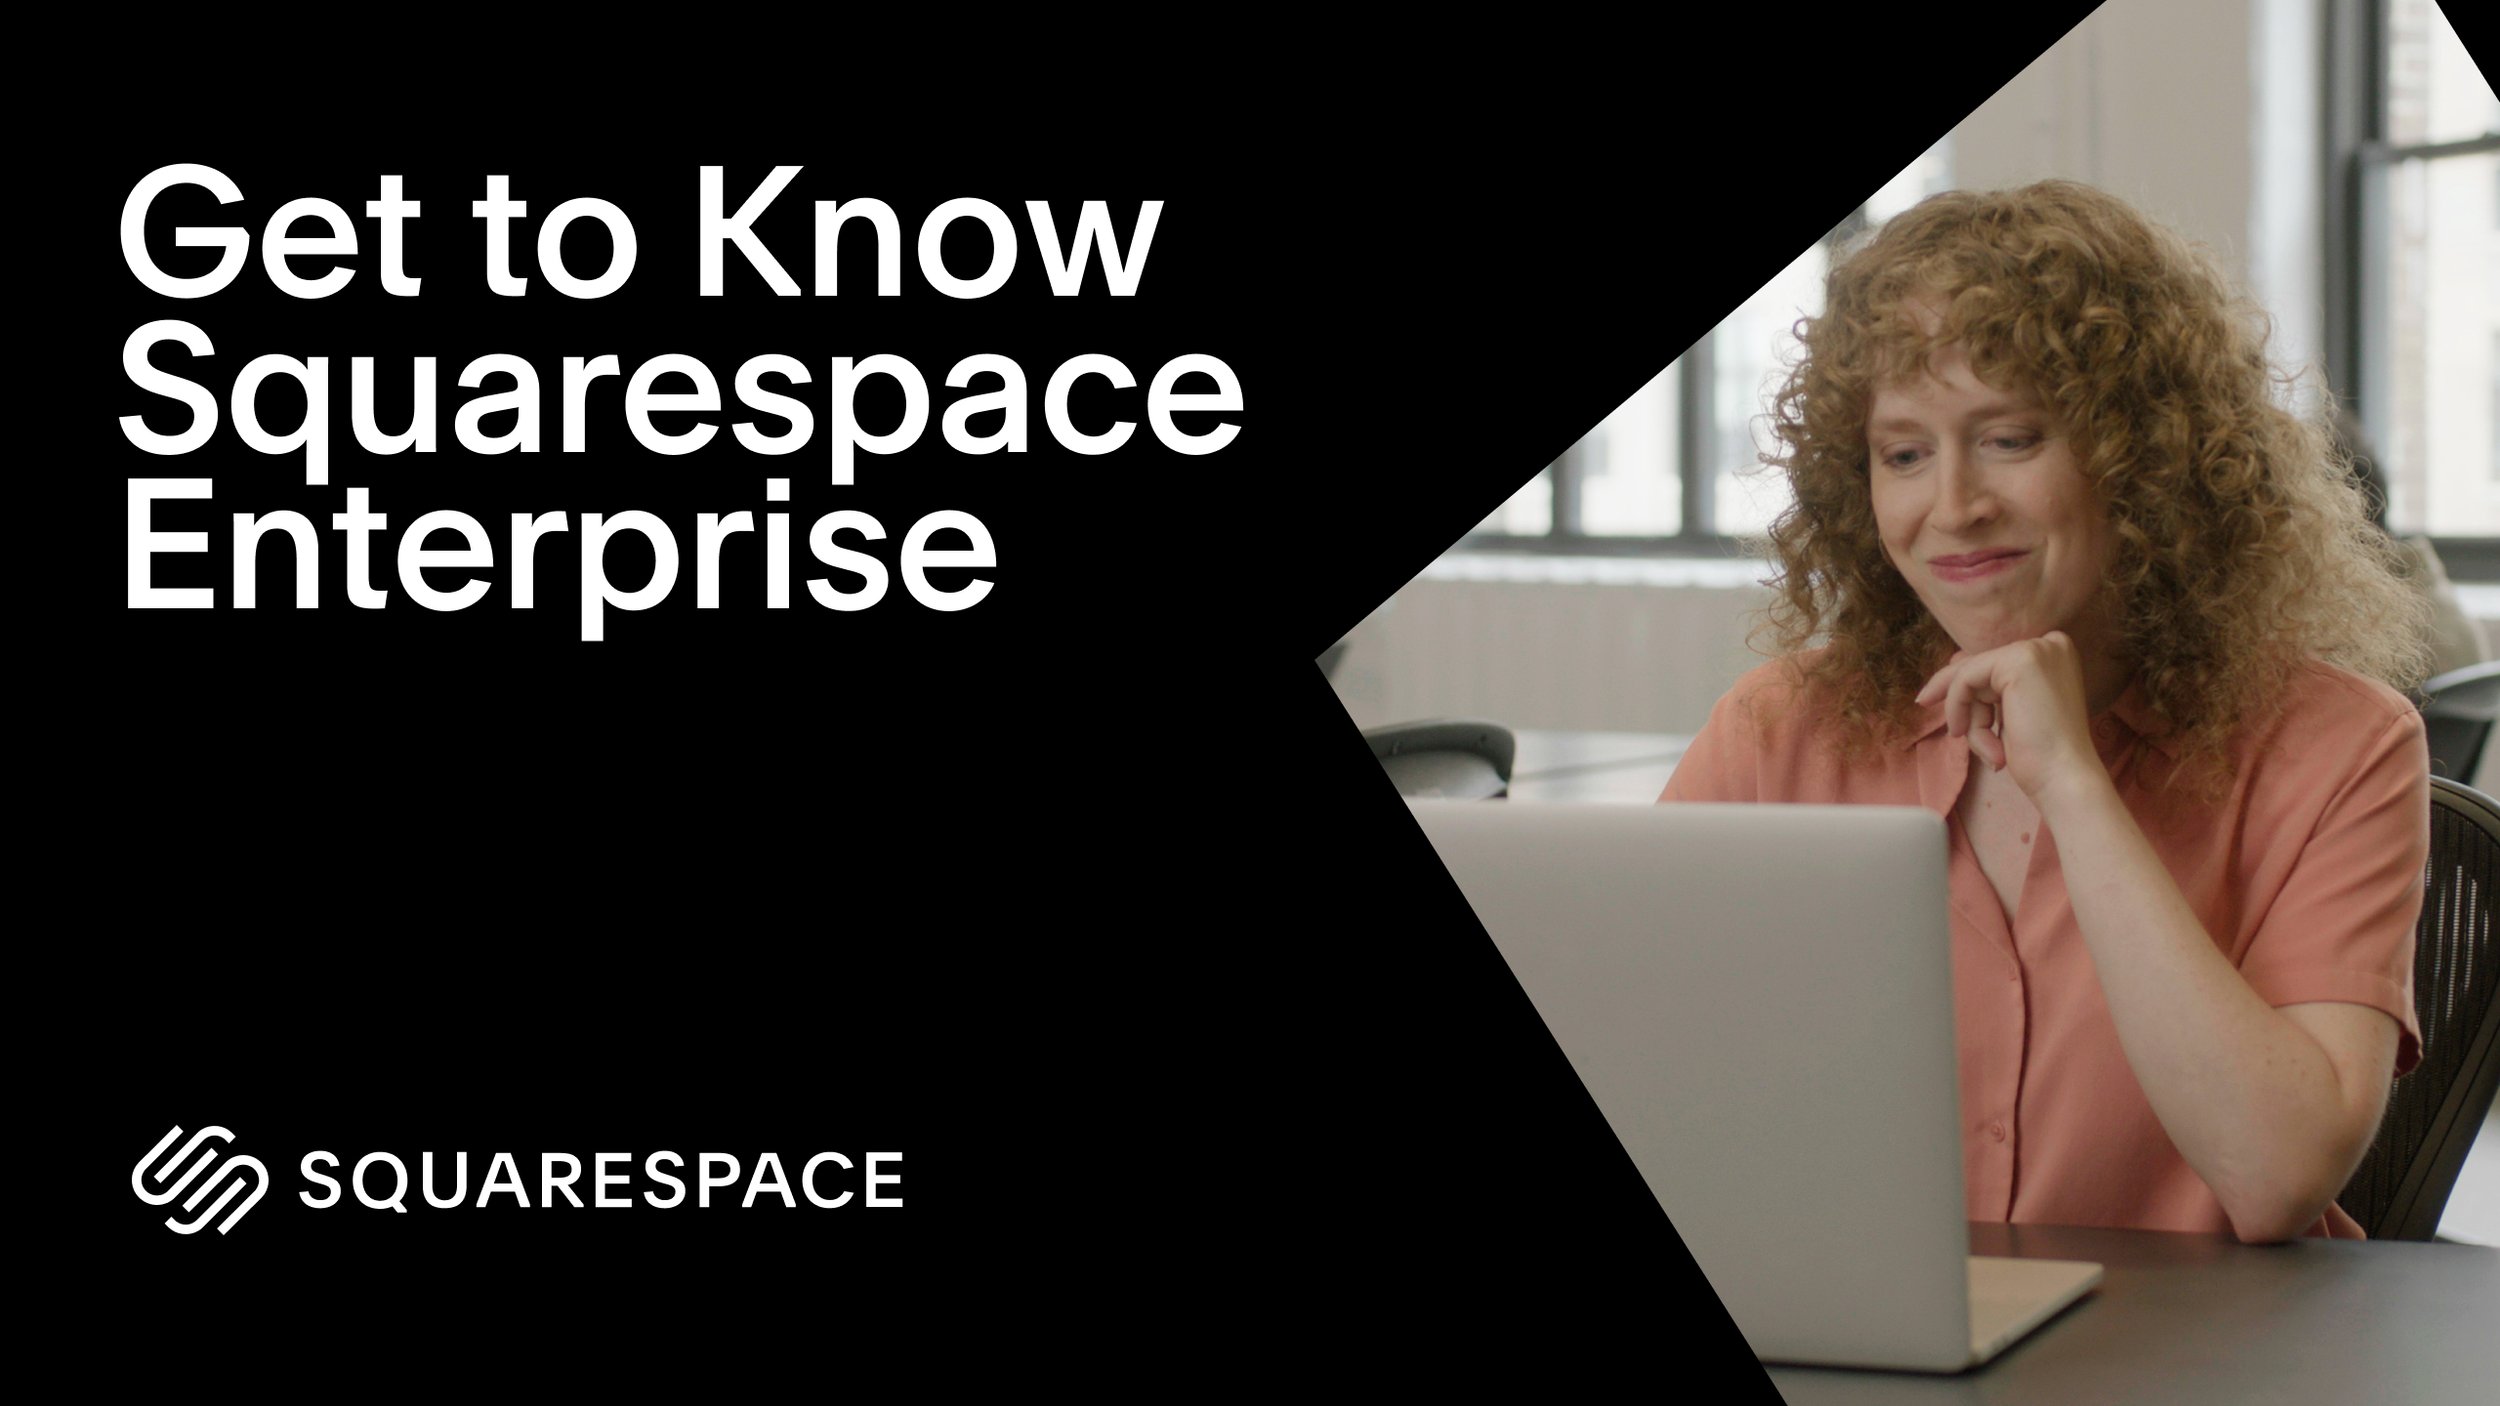 Video: Get to Know Squarespace Enterprise